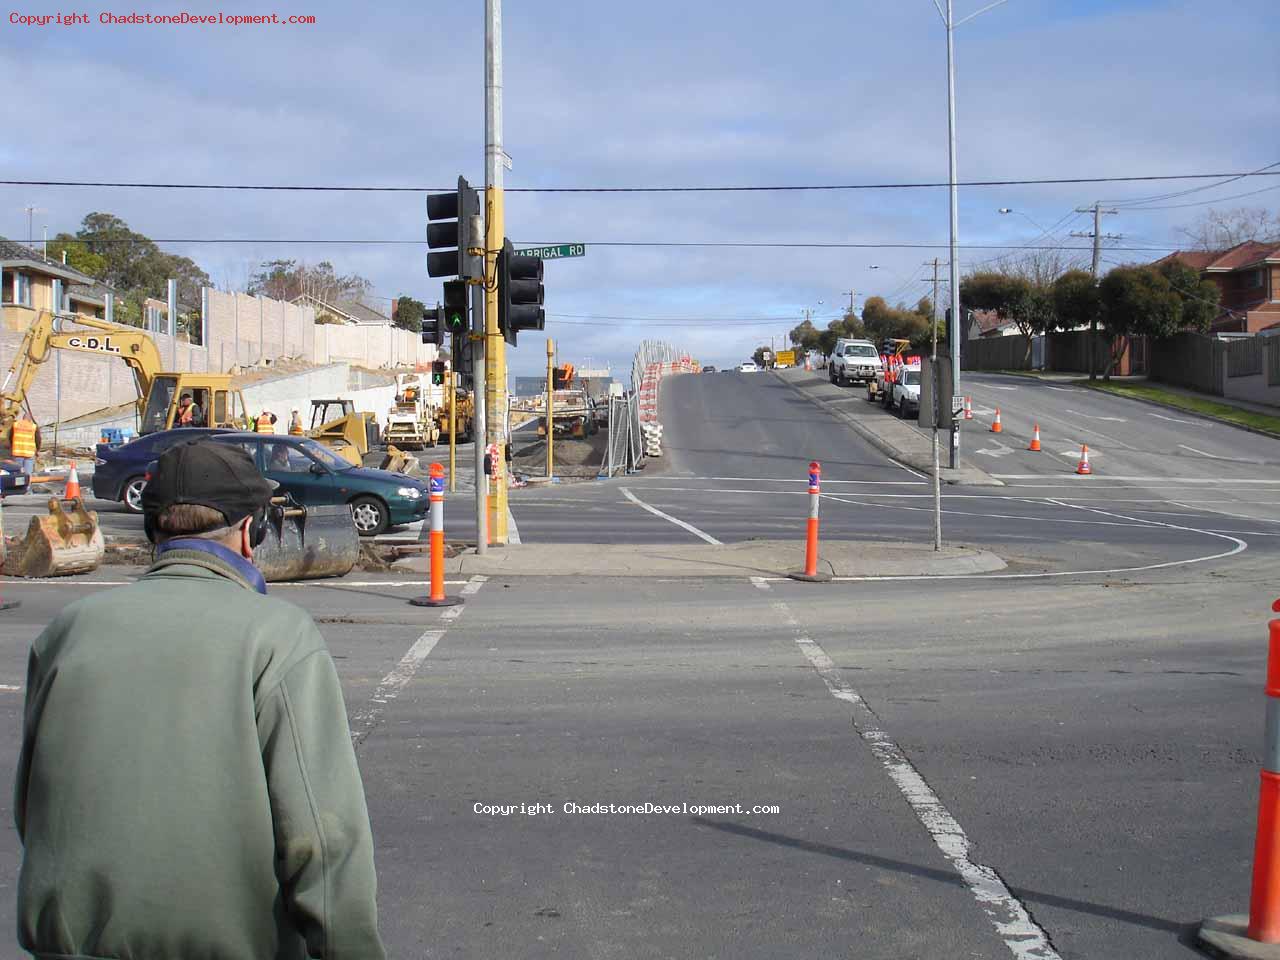 View of middle rd from pedestrian crossing - Chadstone Development Discussions Gallery